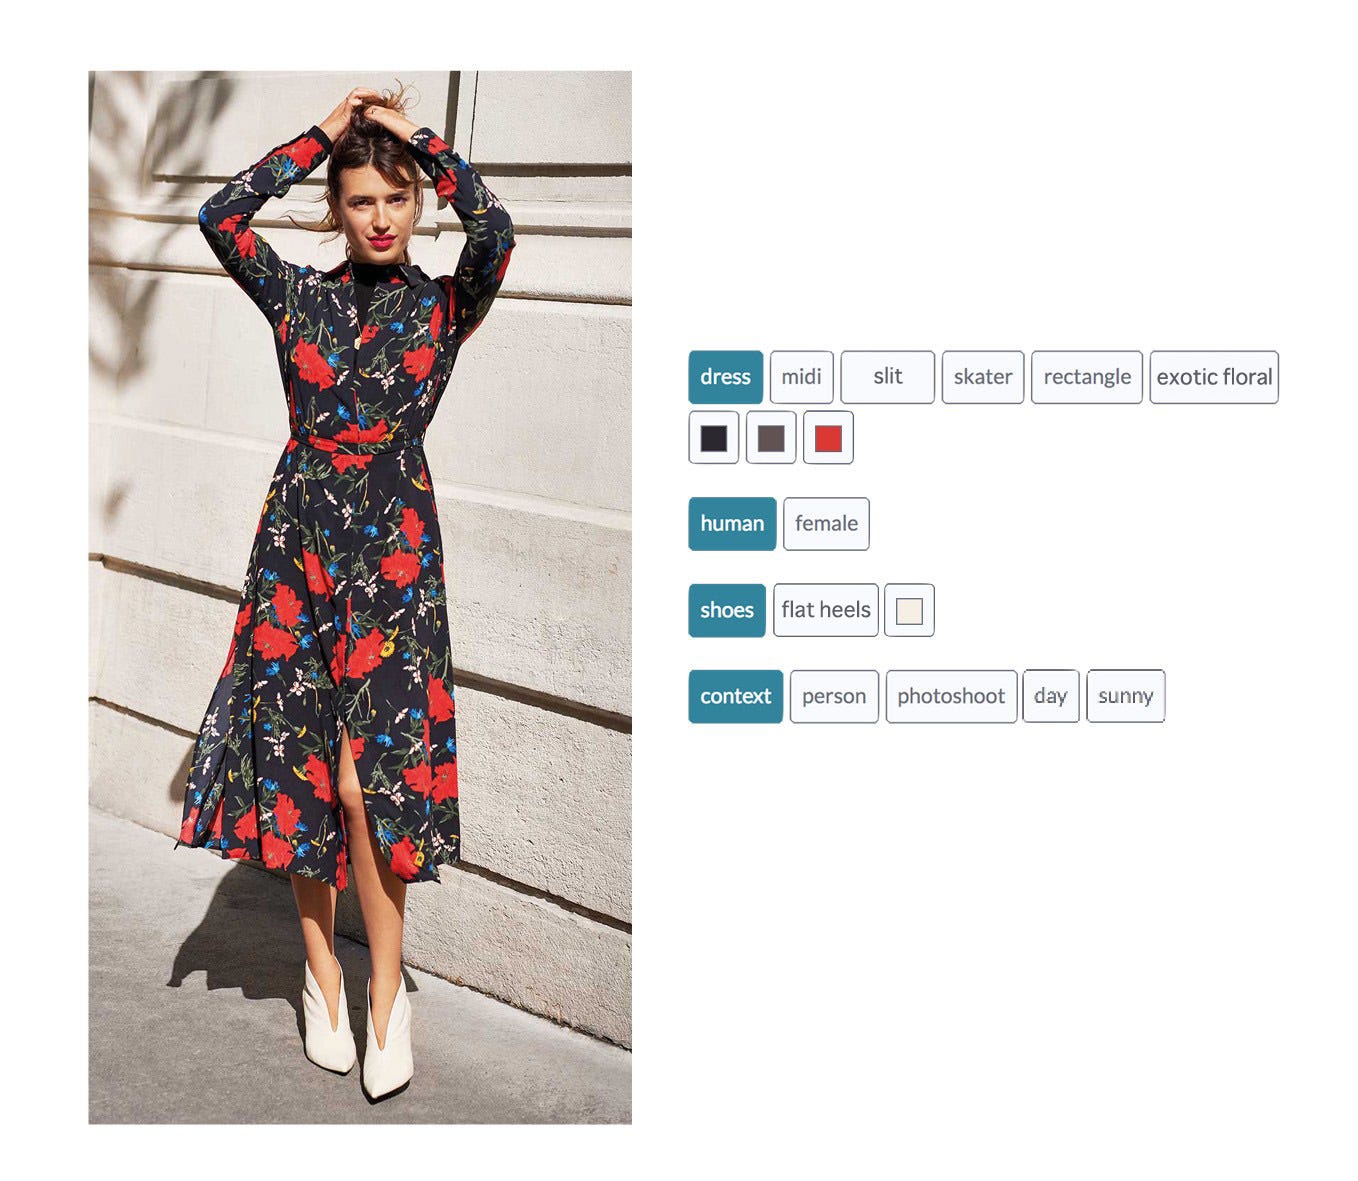 Jeanne Damas poses in a floral dress with Heuritech’s visual recognition technology applied.